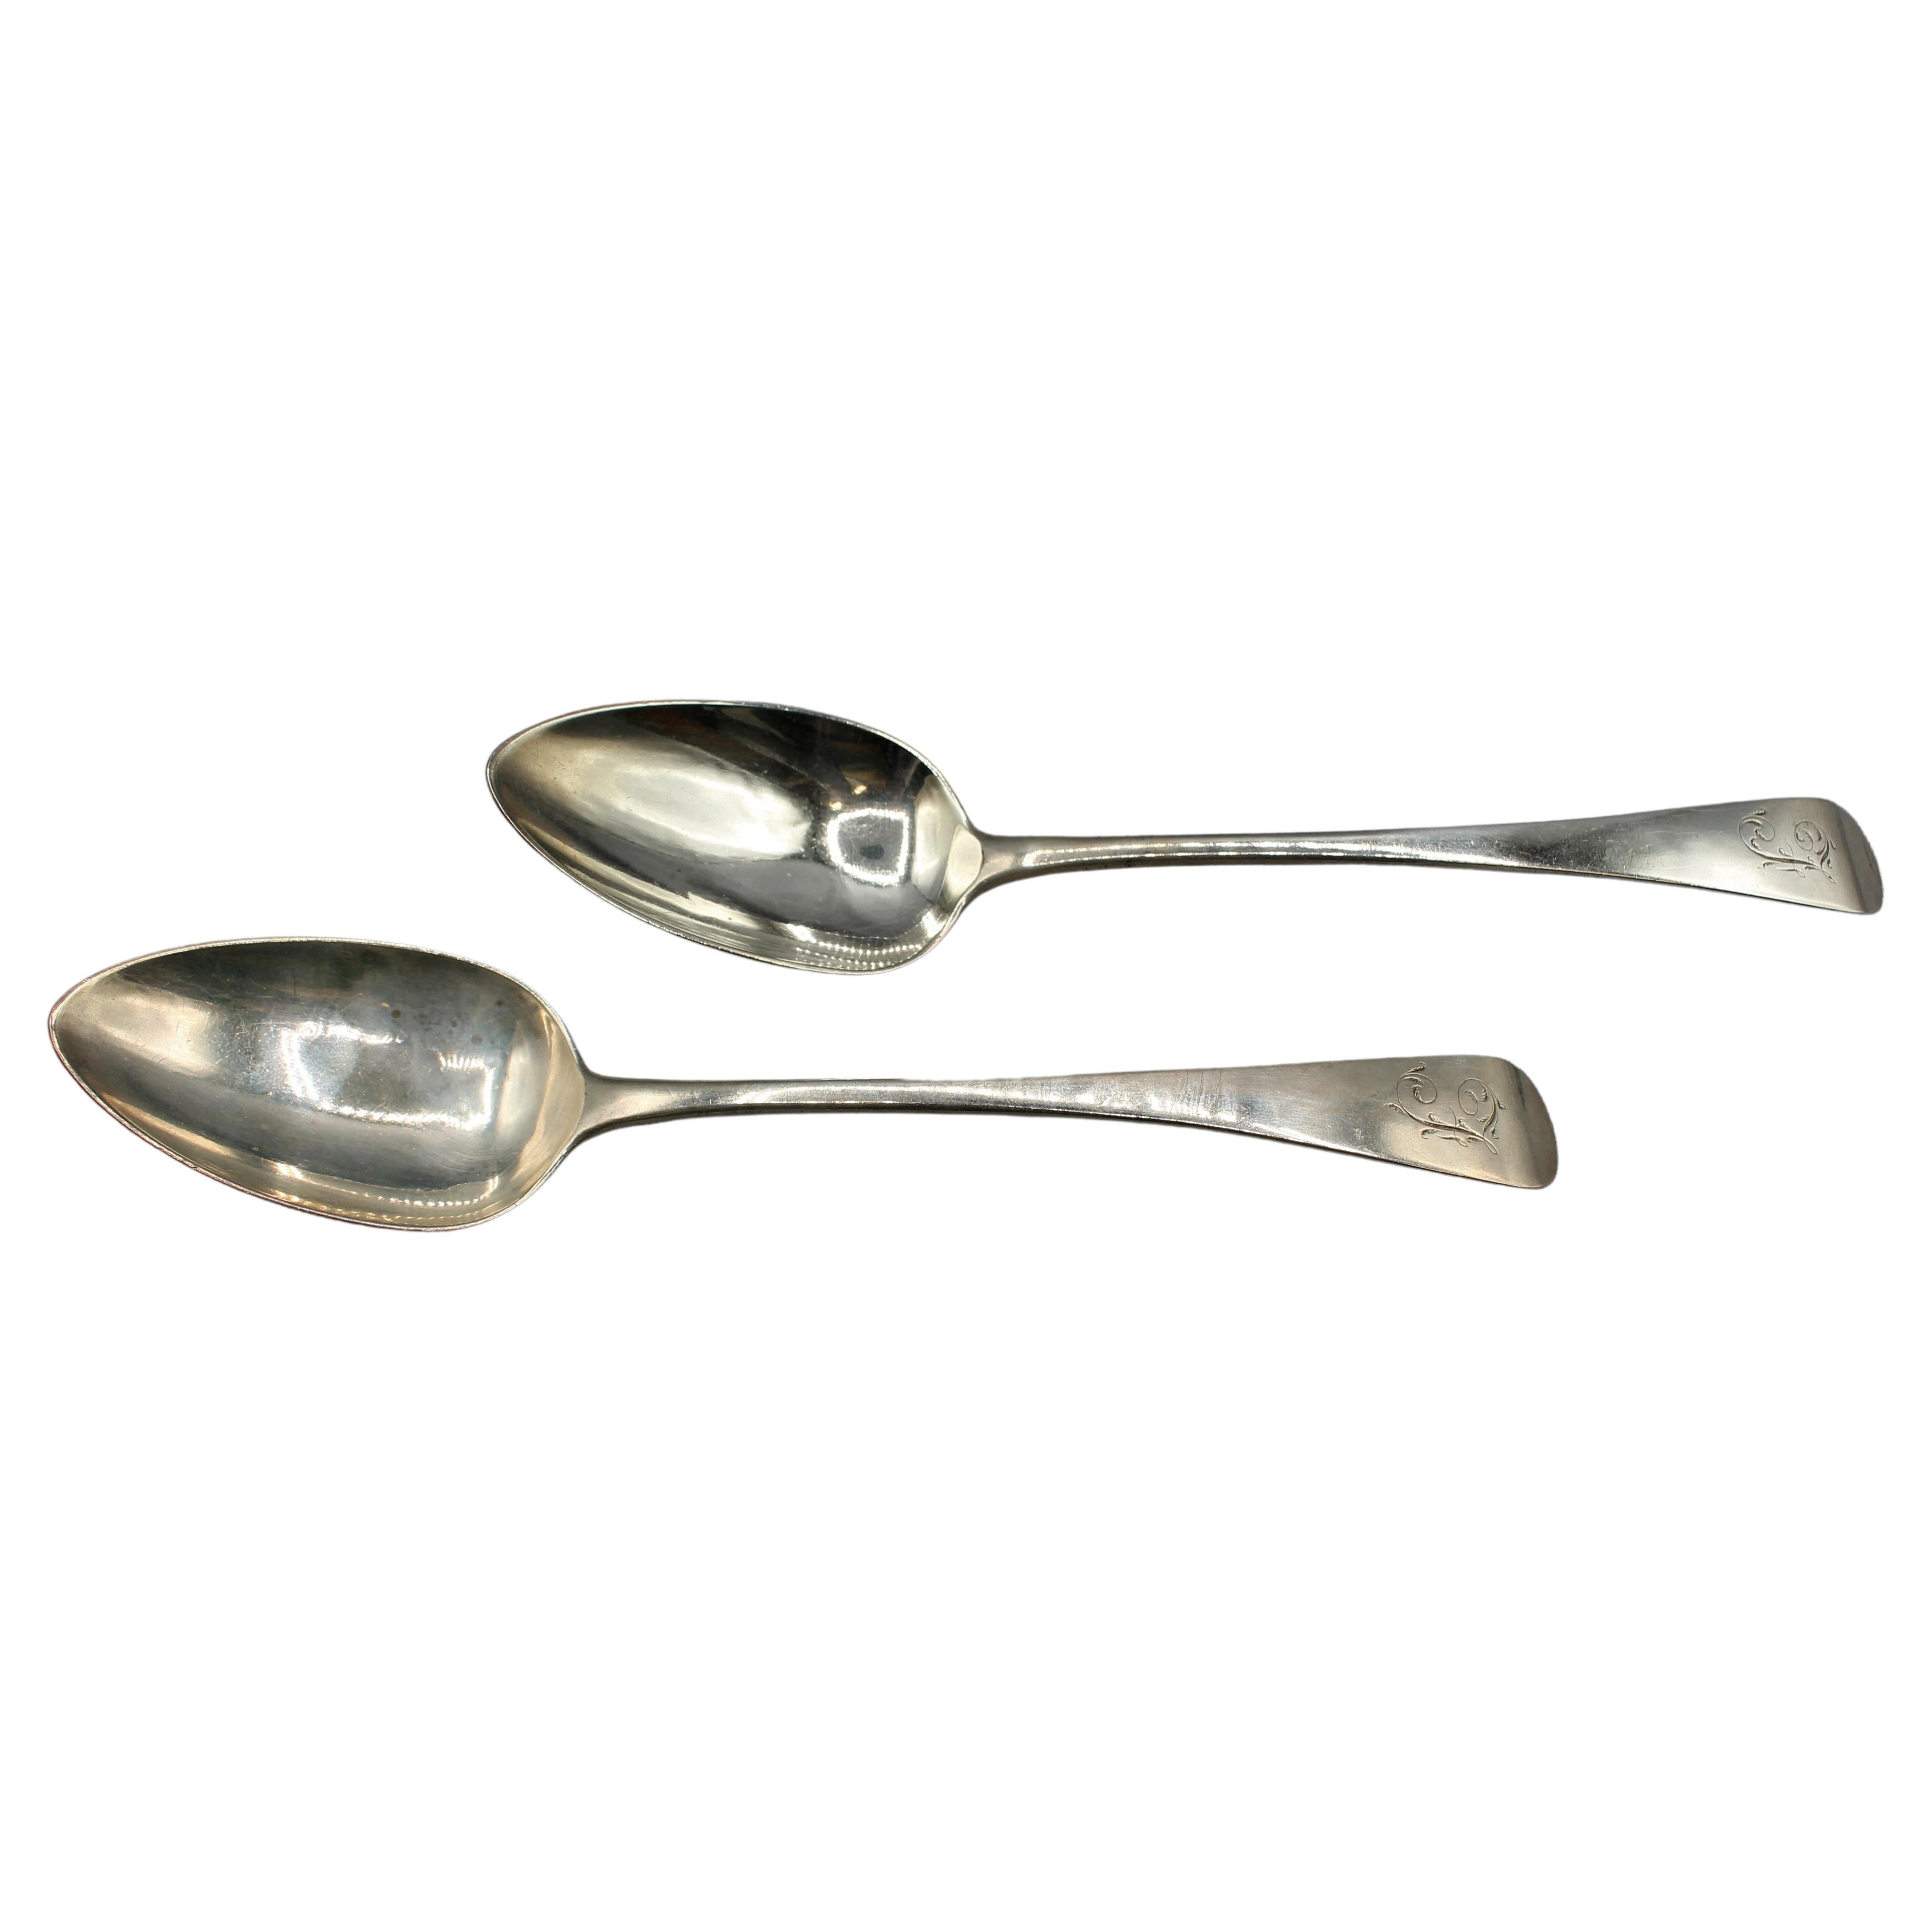 1811 Pair of Sterling Silver Tablespoons by Peter & William Bateman